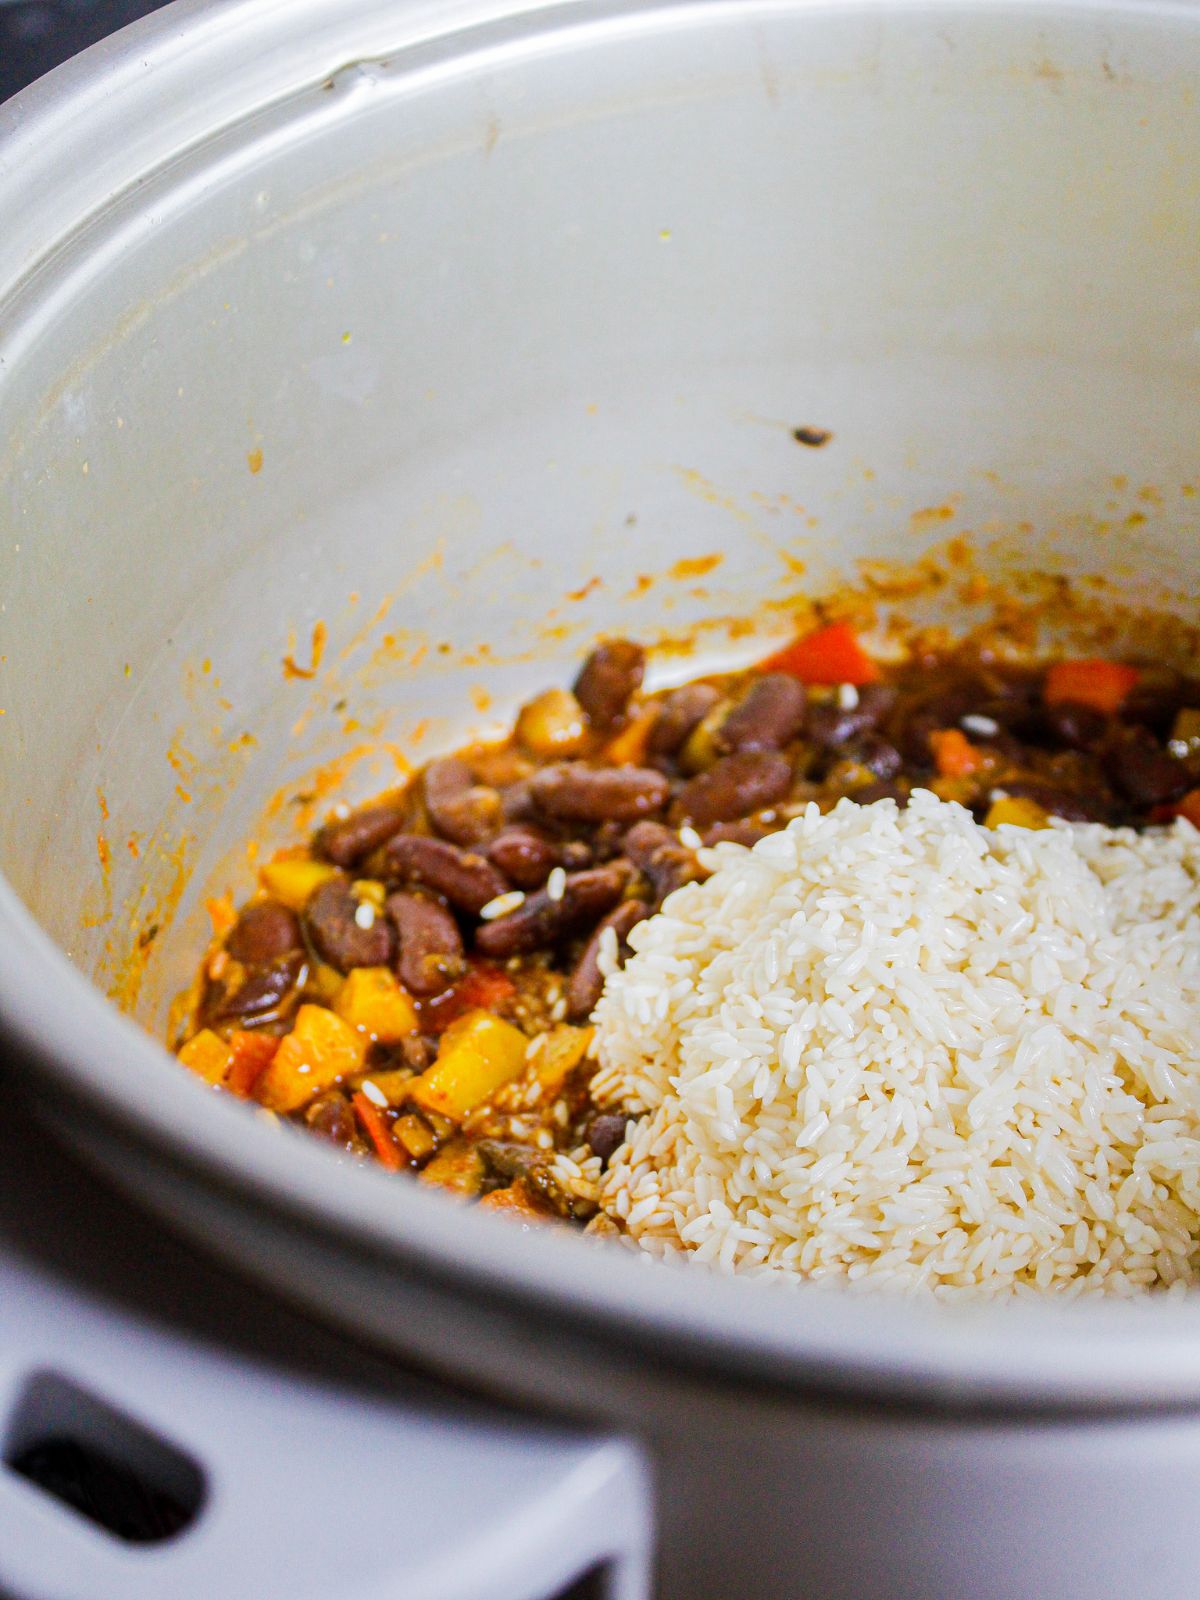 Add boiled rice to the pot and mix well